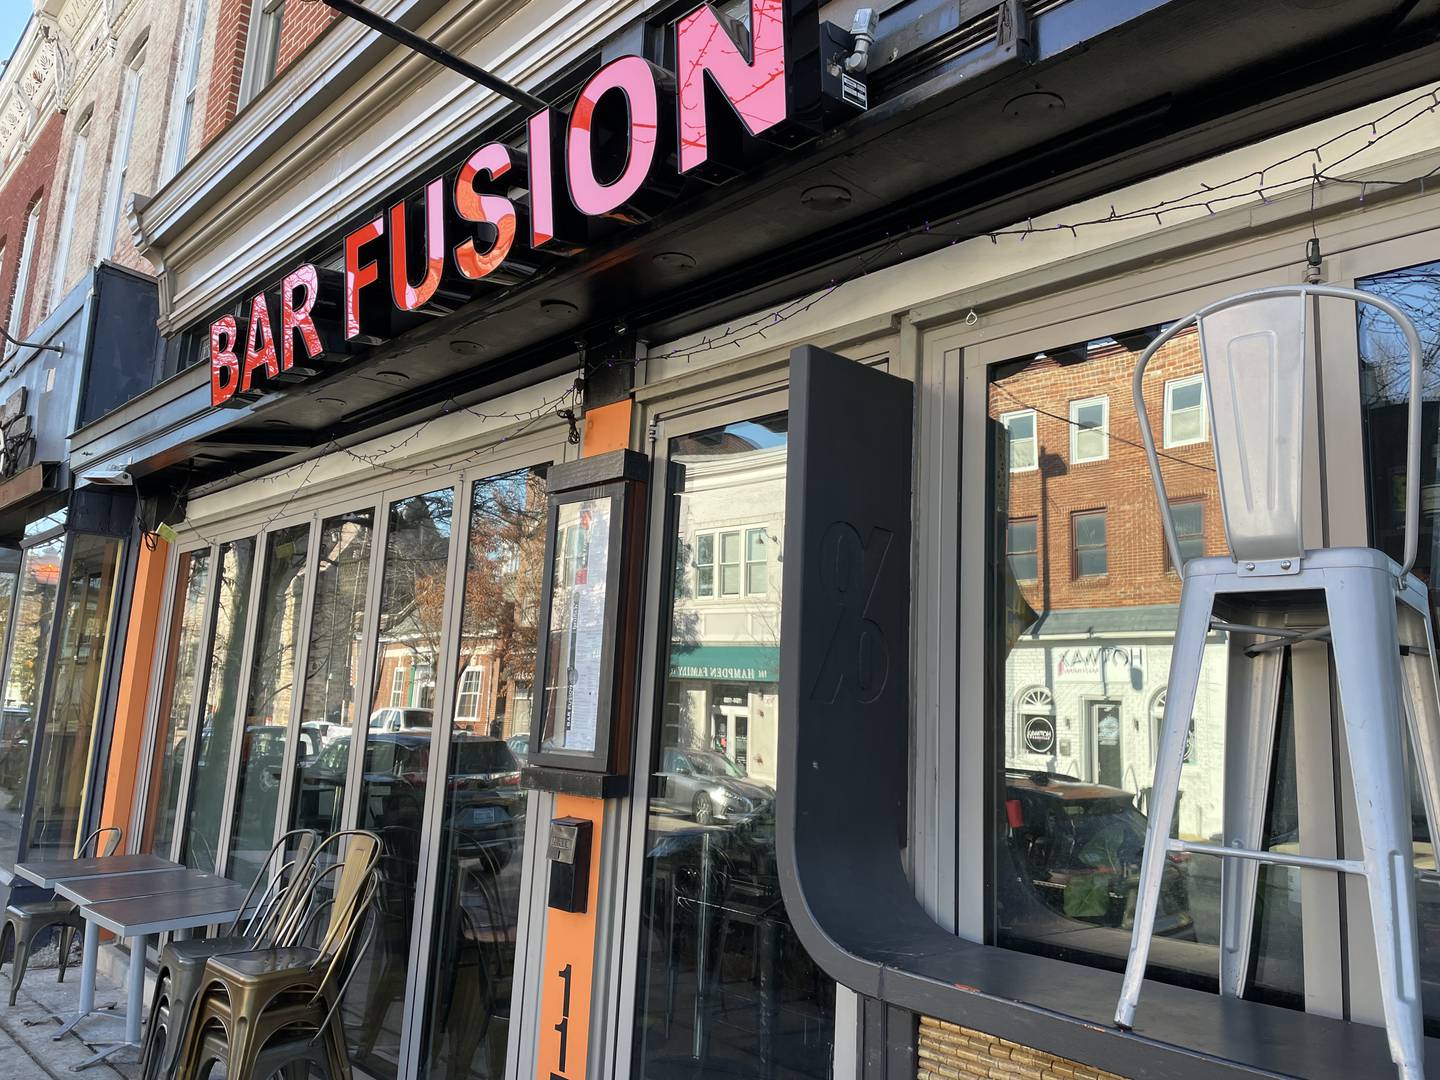 Bar Fusion, a new restaurant in the place of the former 13.5% Wine Bar in Hampden, has encountered opponents in the neighborhood.